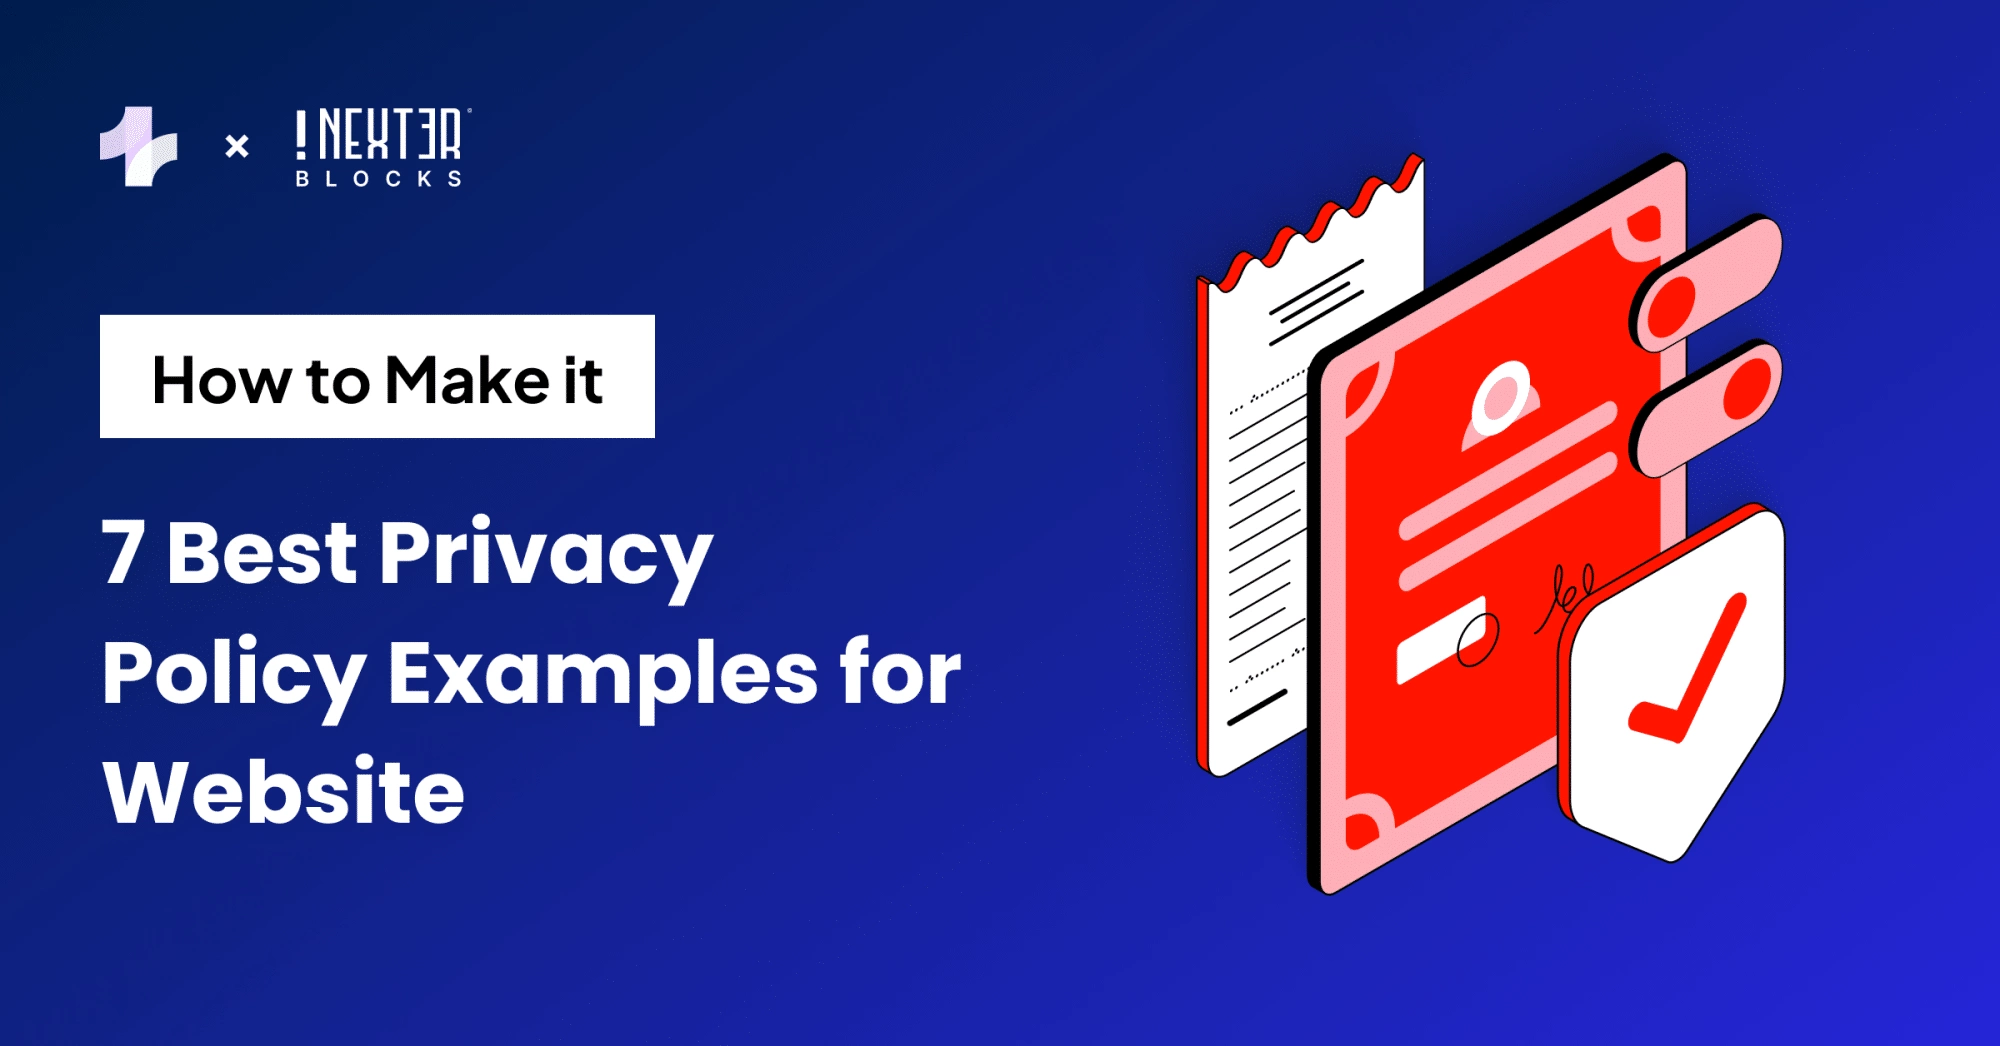 7 Best Privacy Policy Examples for Website Tips How to Make it - 7 Best Privacy Policy Examples for Website [Tips + How to Make it]